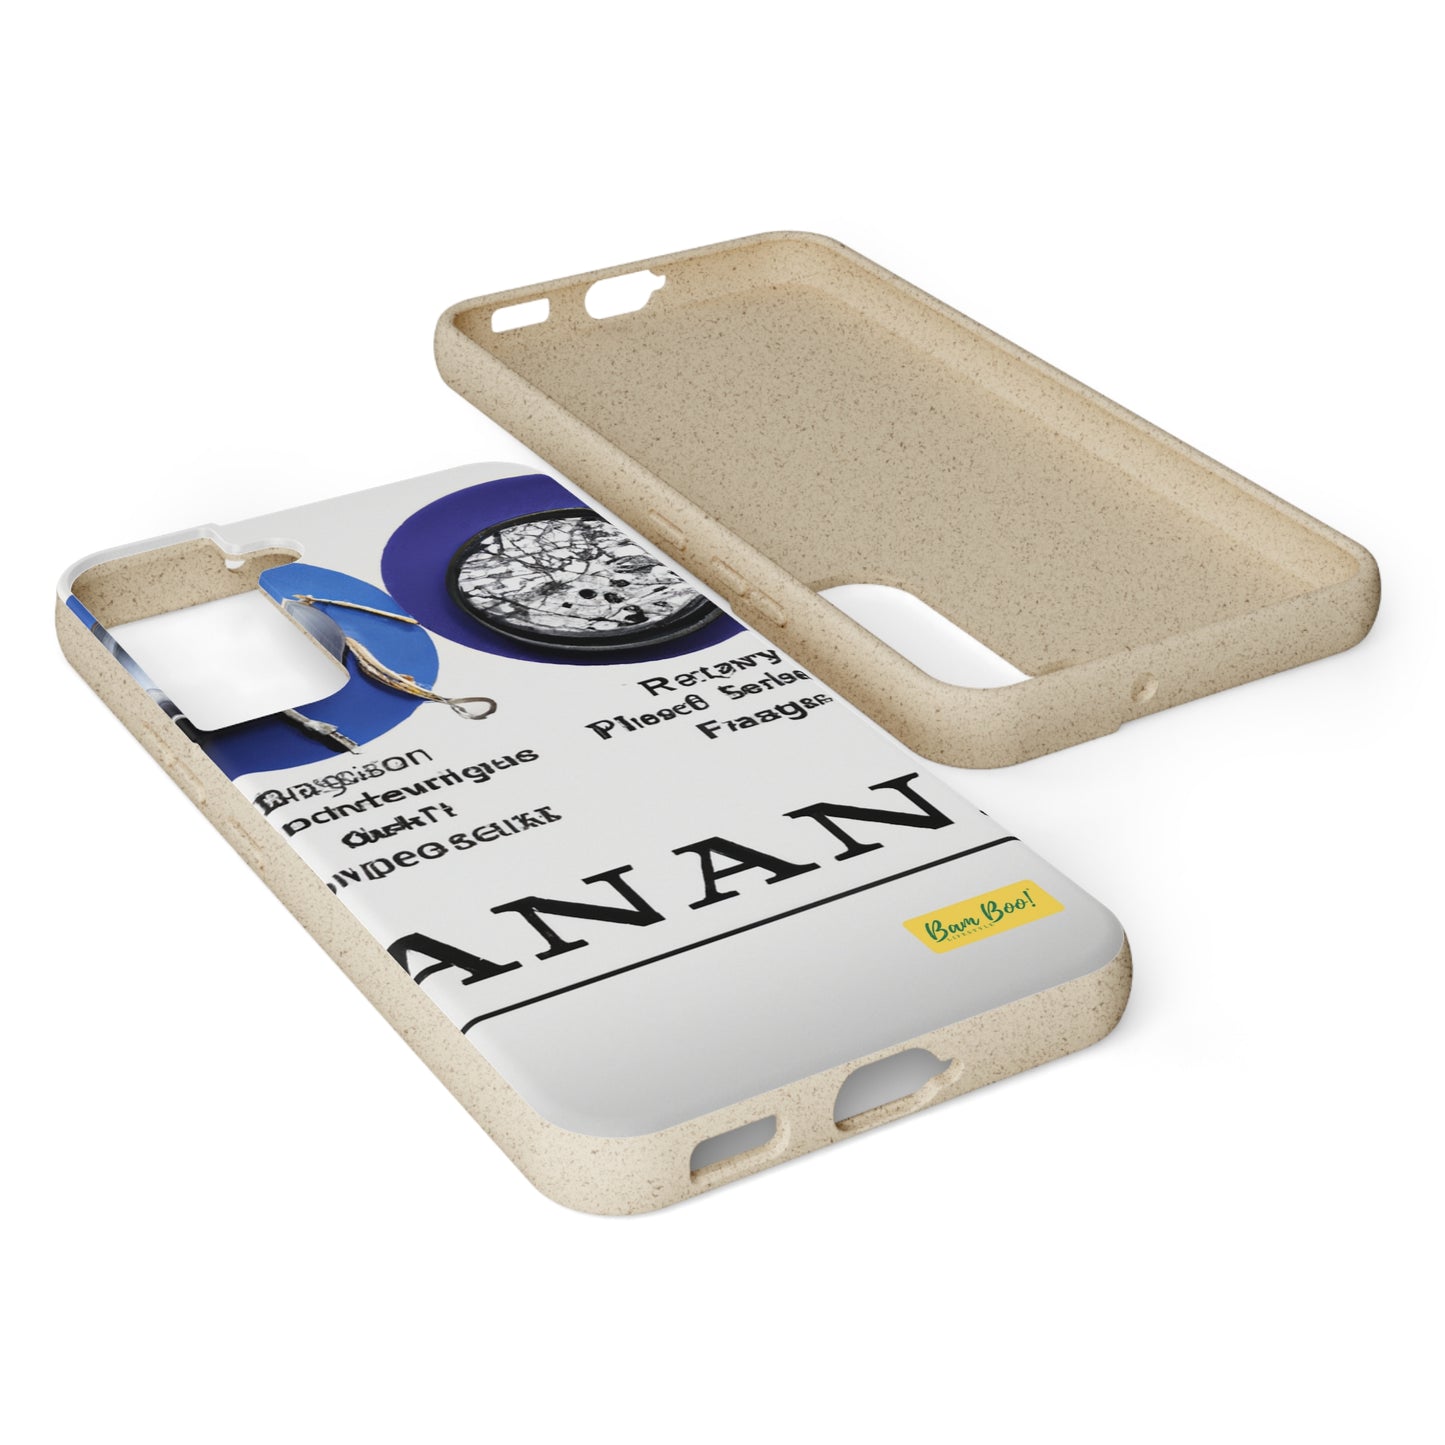 "Themeless Seamless: A Creative Collage of Uniquely Resounding Visuals” - Bam Boo! Lifestyle Eco-friendly Cases